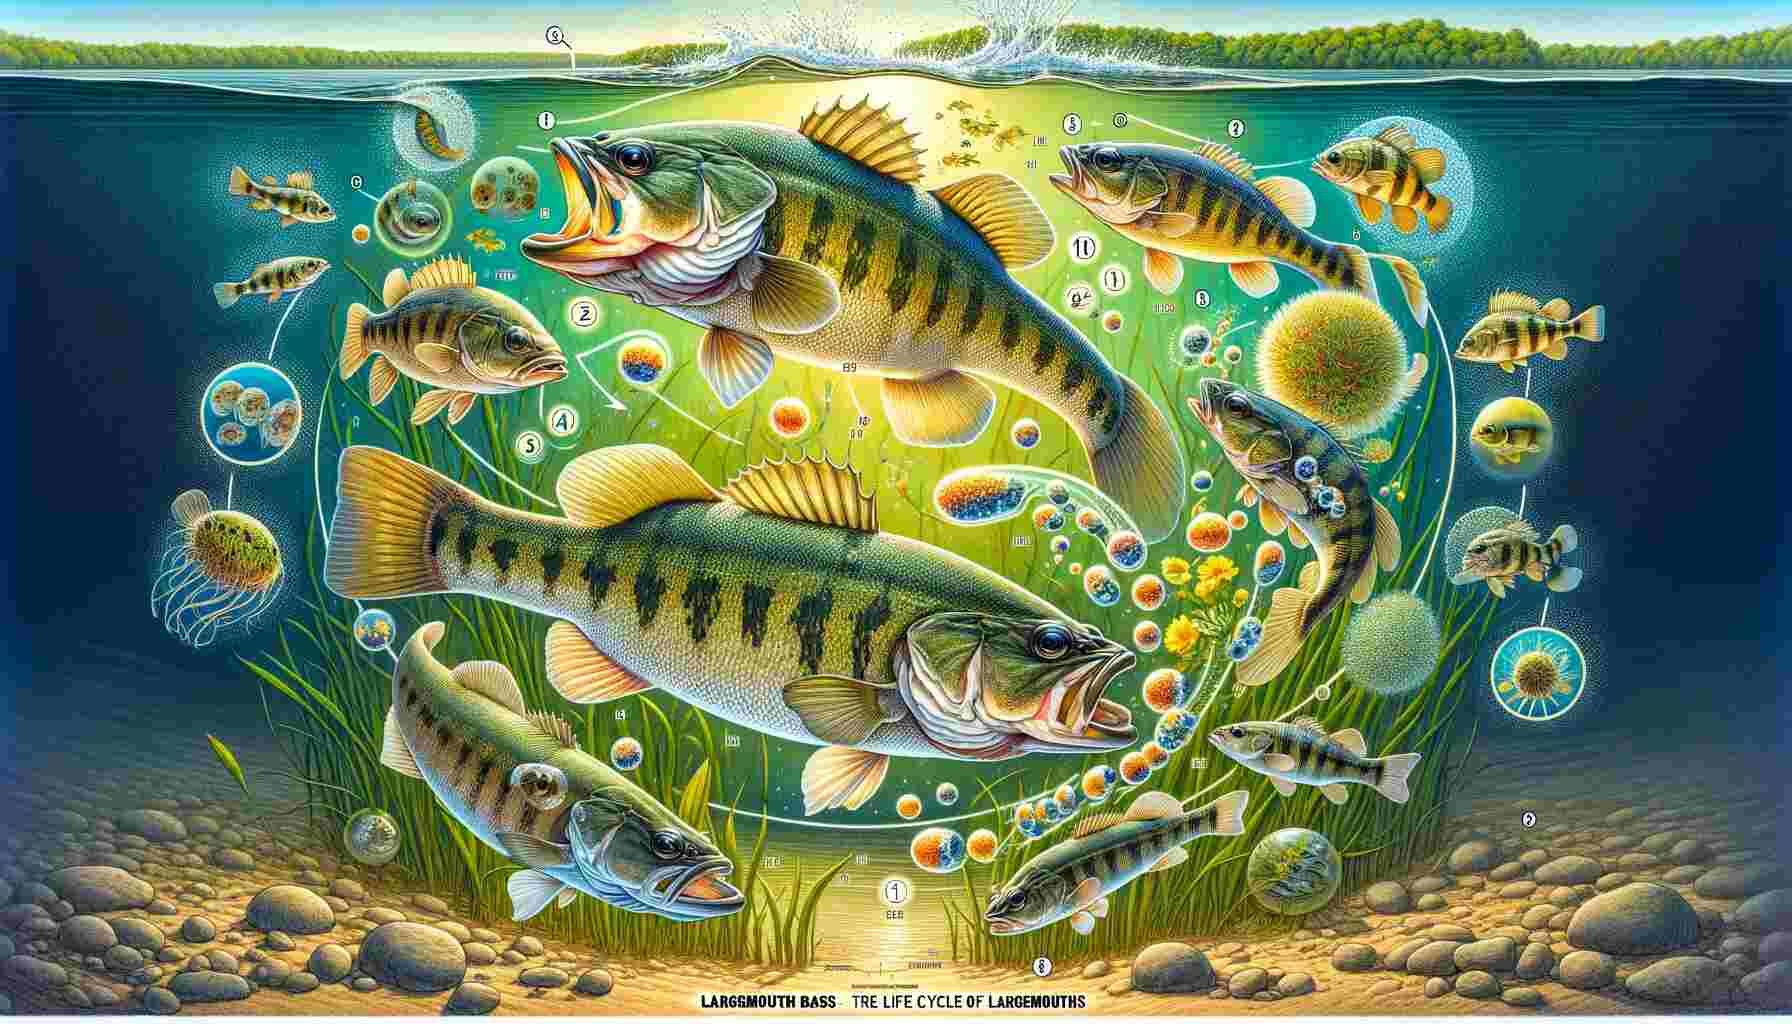 Here's the featured image illustrating the life cycle of a Largemouth Bass during spawning. It depicts various stages including eggs, fry, juveniles, and adults in a freshwater environment, with a serene lake setting as the backdrop.